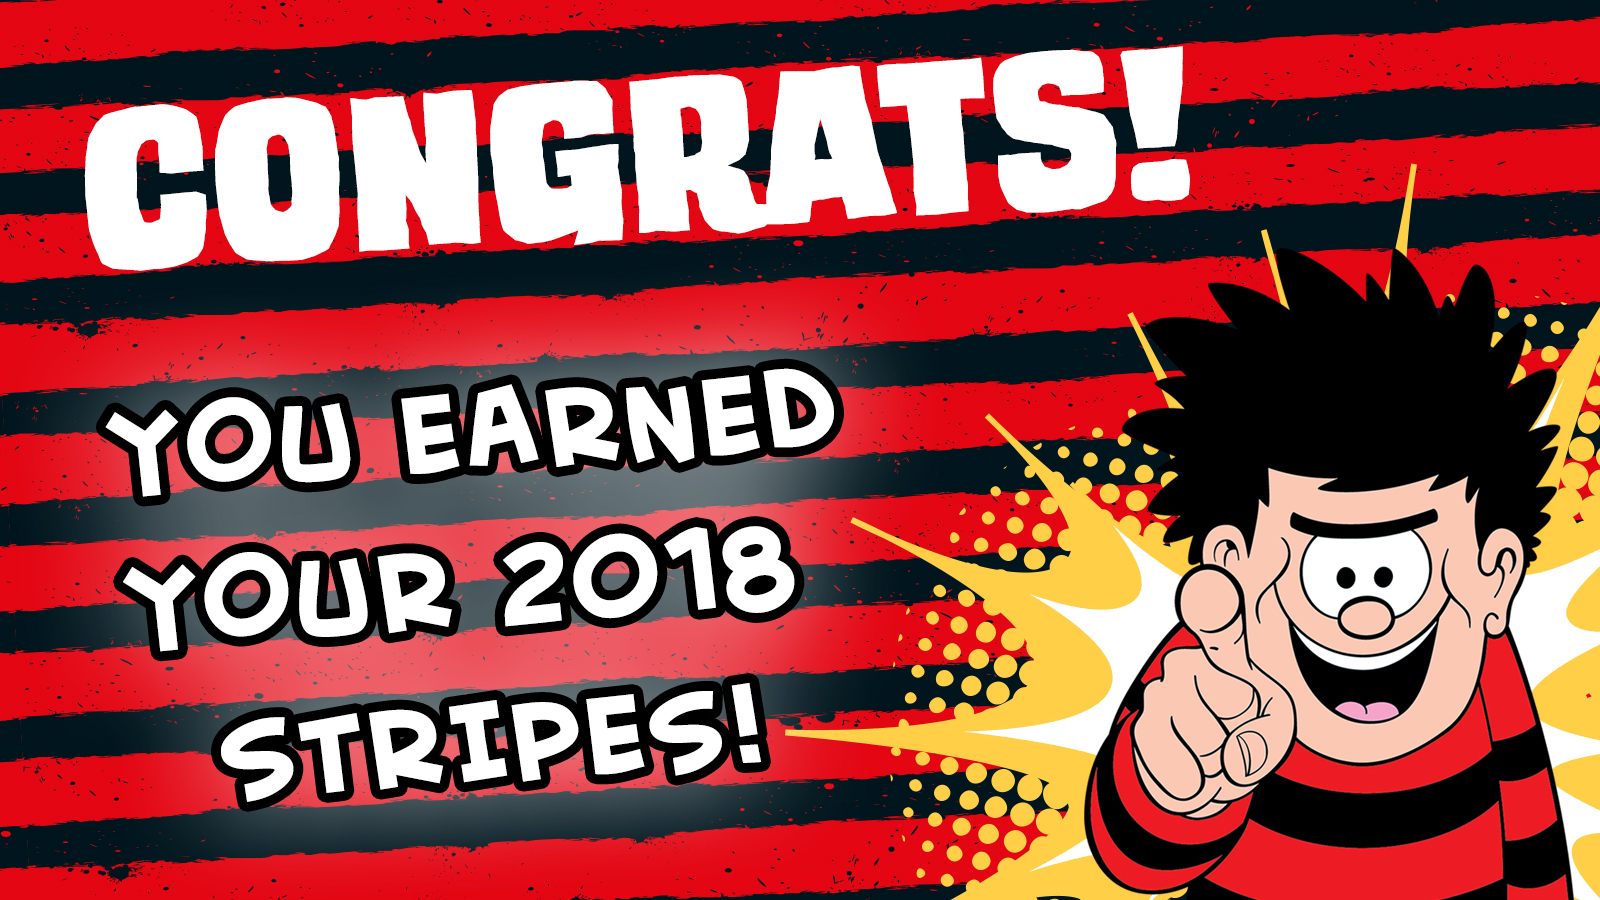 YOU earned your 2018 stripes!